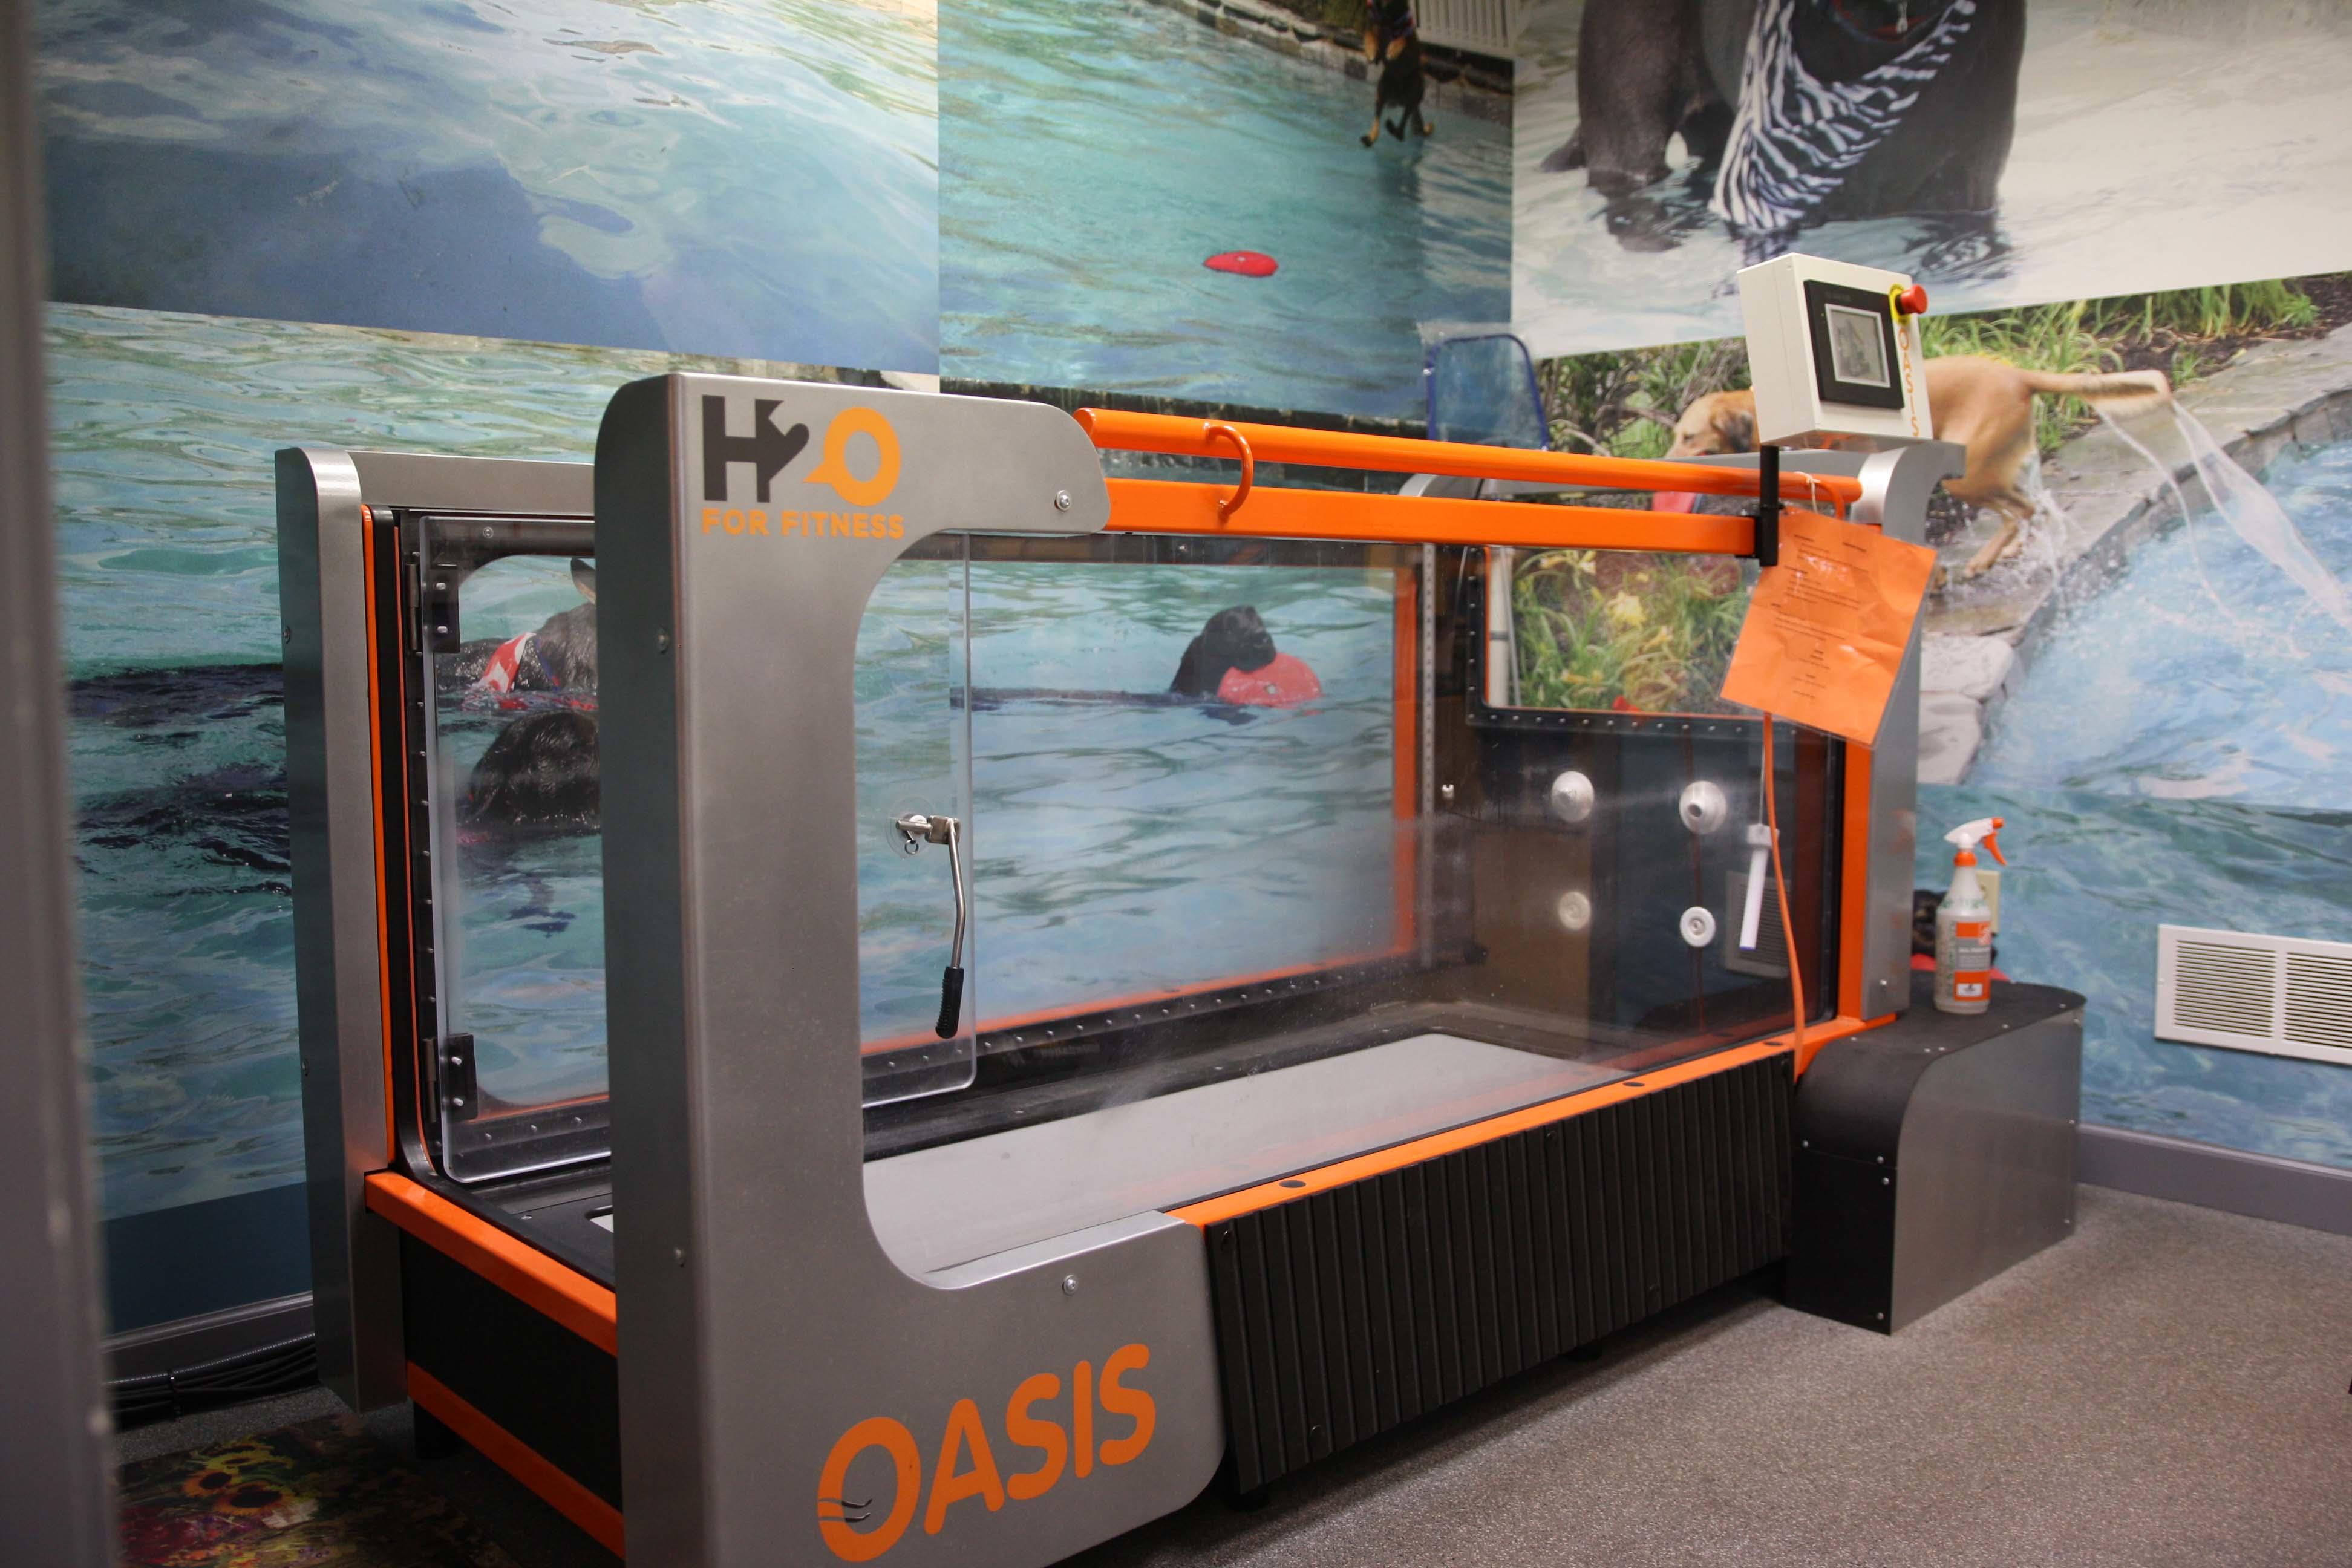 This is our state of the art Oasis hydrotherapy treadmill. This is a great tool for providing your pets with high intensity fitness training and weight control, with very low impact to their joints and physical condition. We are proud to be one of the only veterinary clinics in our area that offer this service.